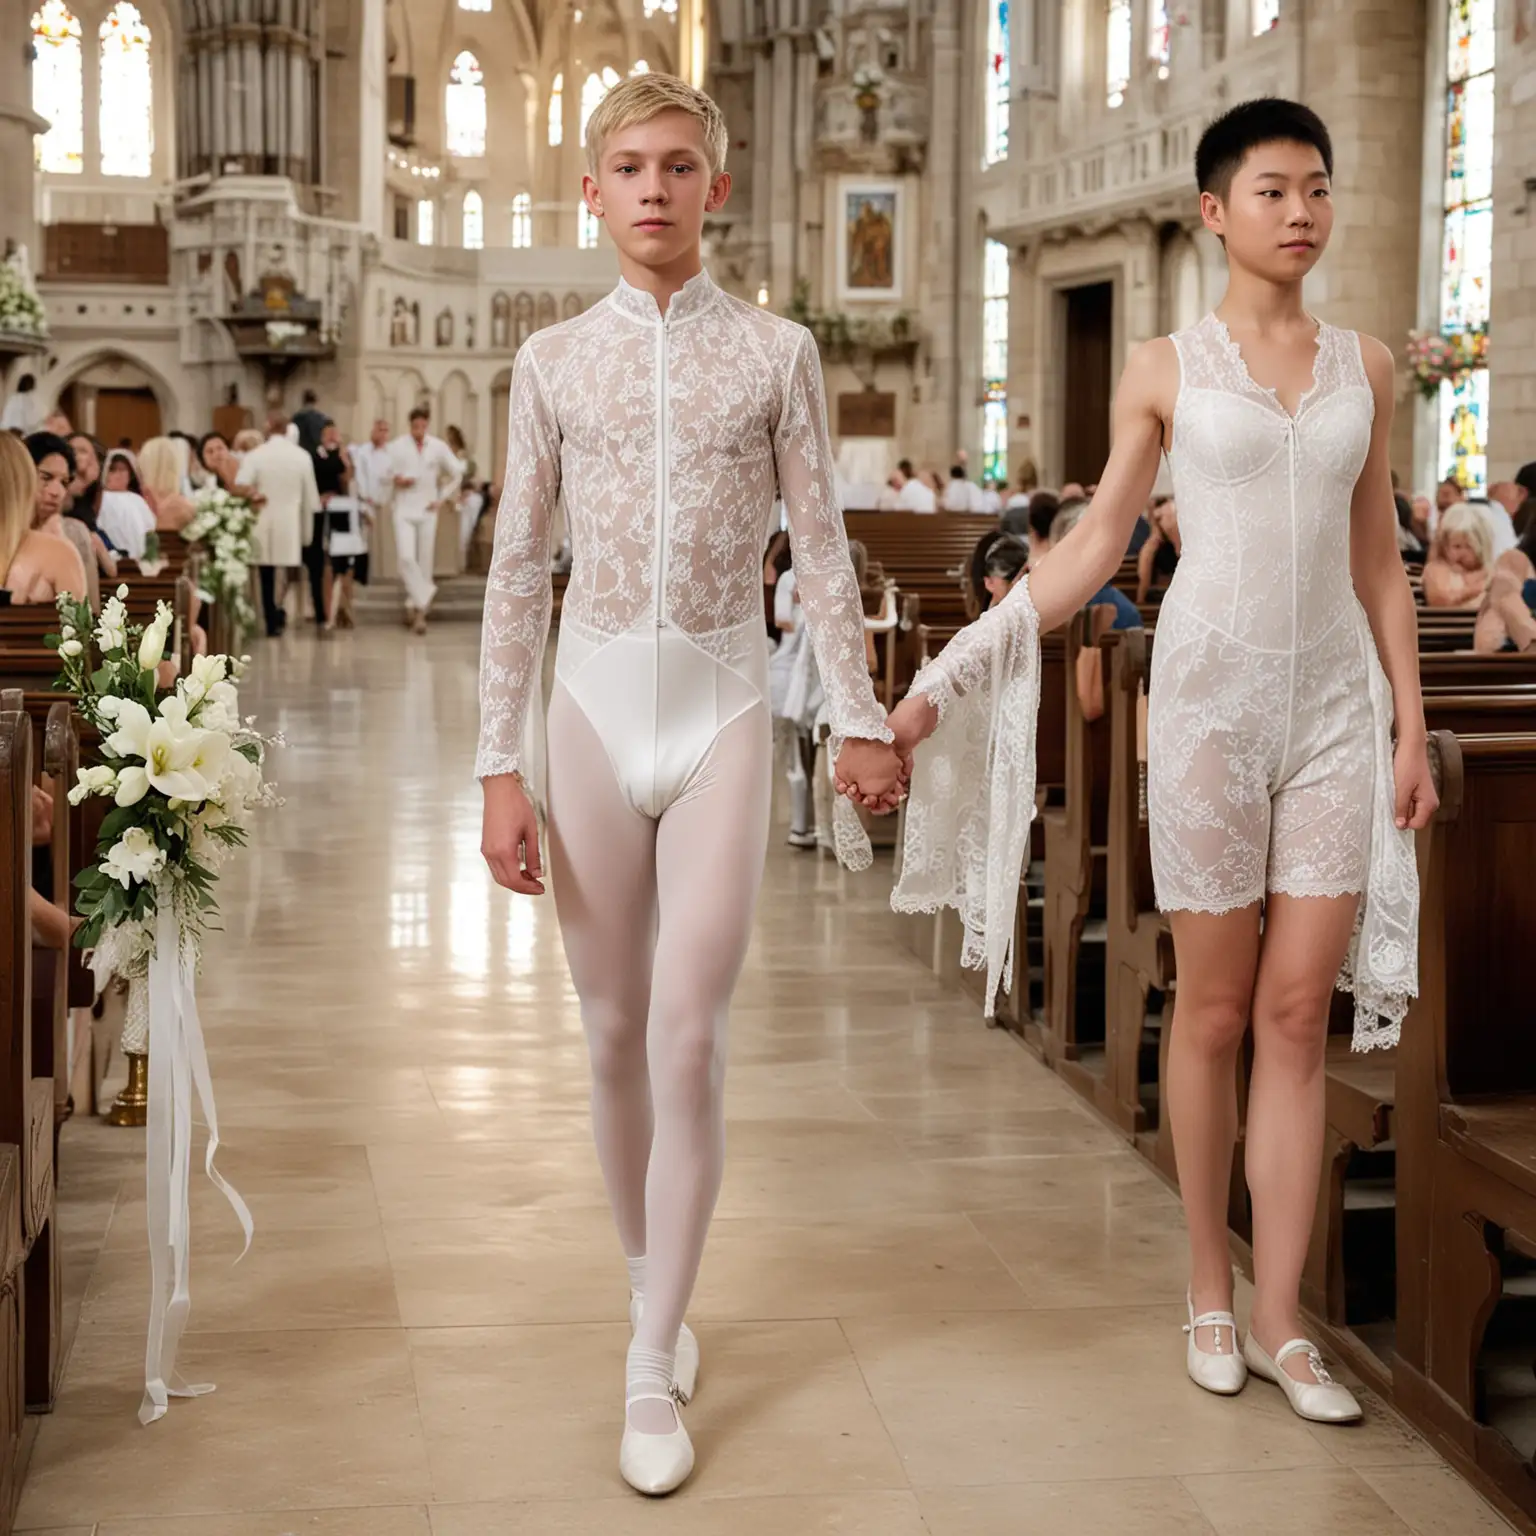 very, very, thin 14 year old male blond boy in skin-tight white lace short catsuit with bare legs at wedding. White ballet flats. he has 25cm waist. no collar.  He is walking down the aisle of a church holding the hand of a very, very, thin 40 year old male Chinese man in skin-tight white lace catsuit. White ballet flats. he has 25cm waist. no collar.